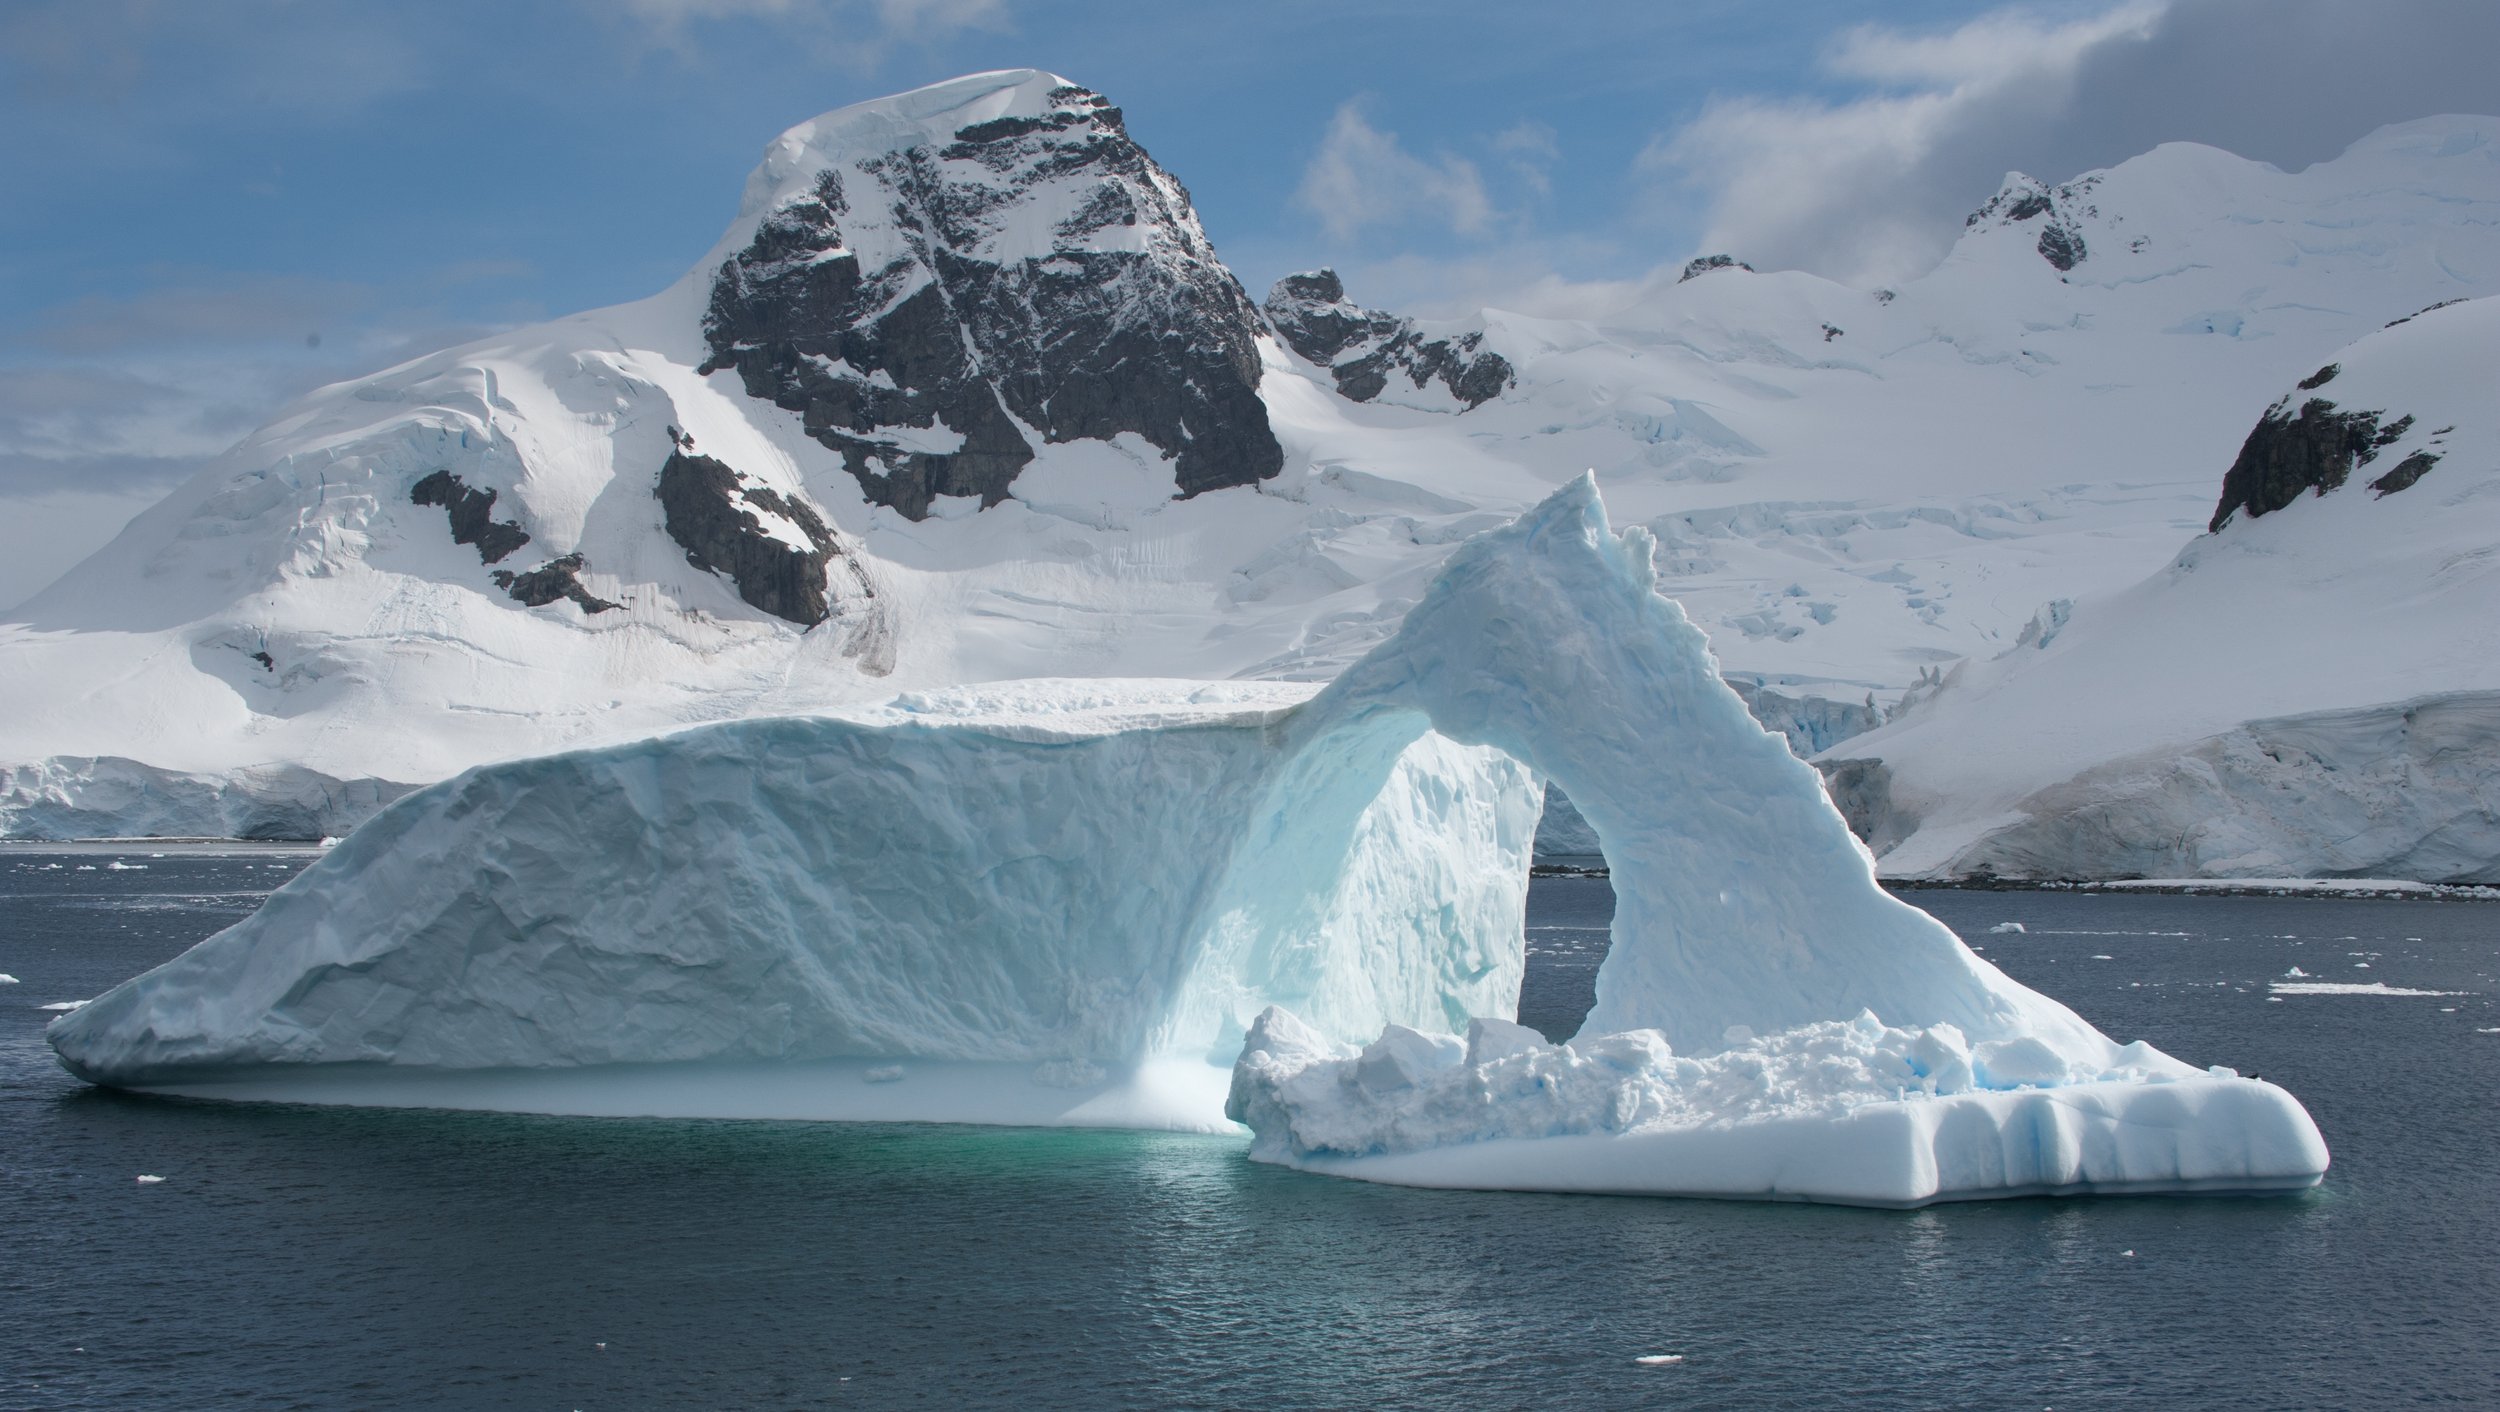 One of the many icebergs floating around you in Antarctic waters_Erwin Vermeulen.jpeg